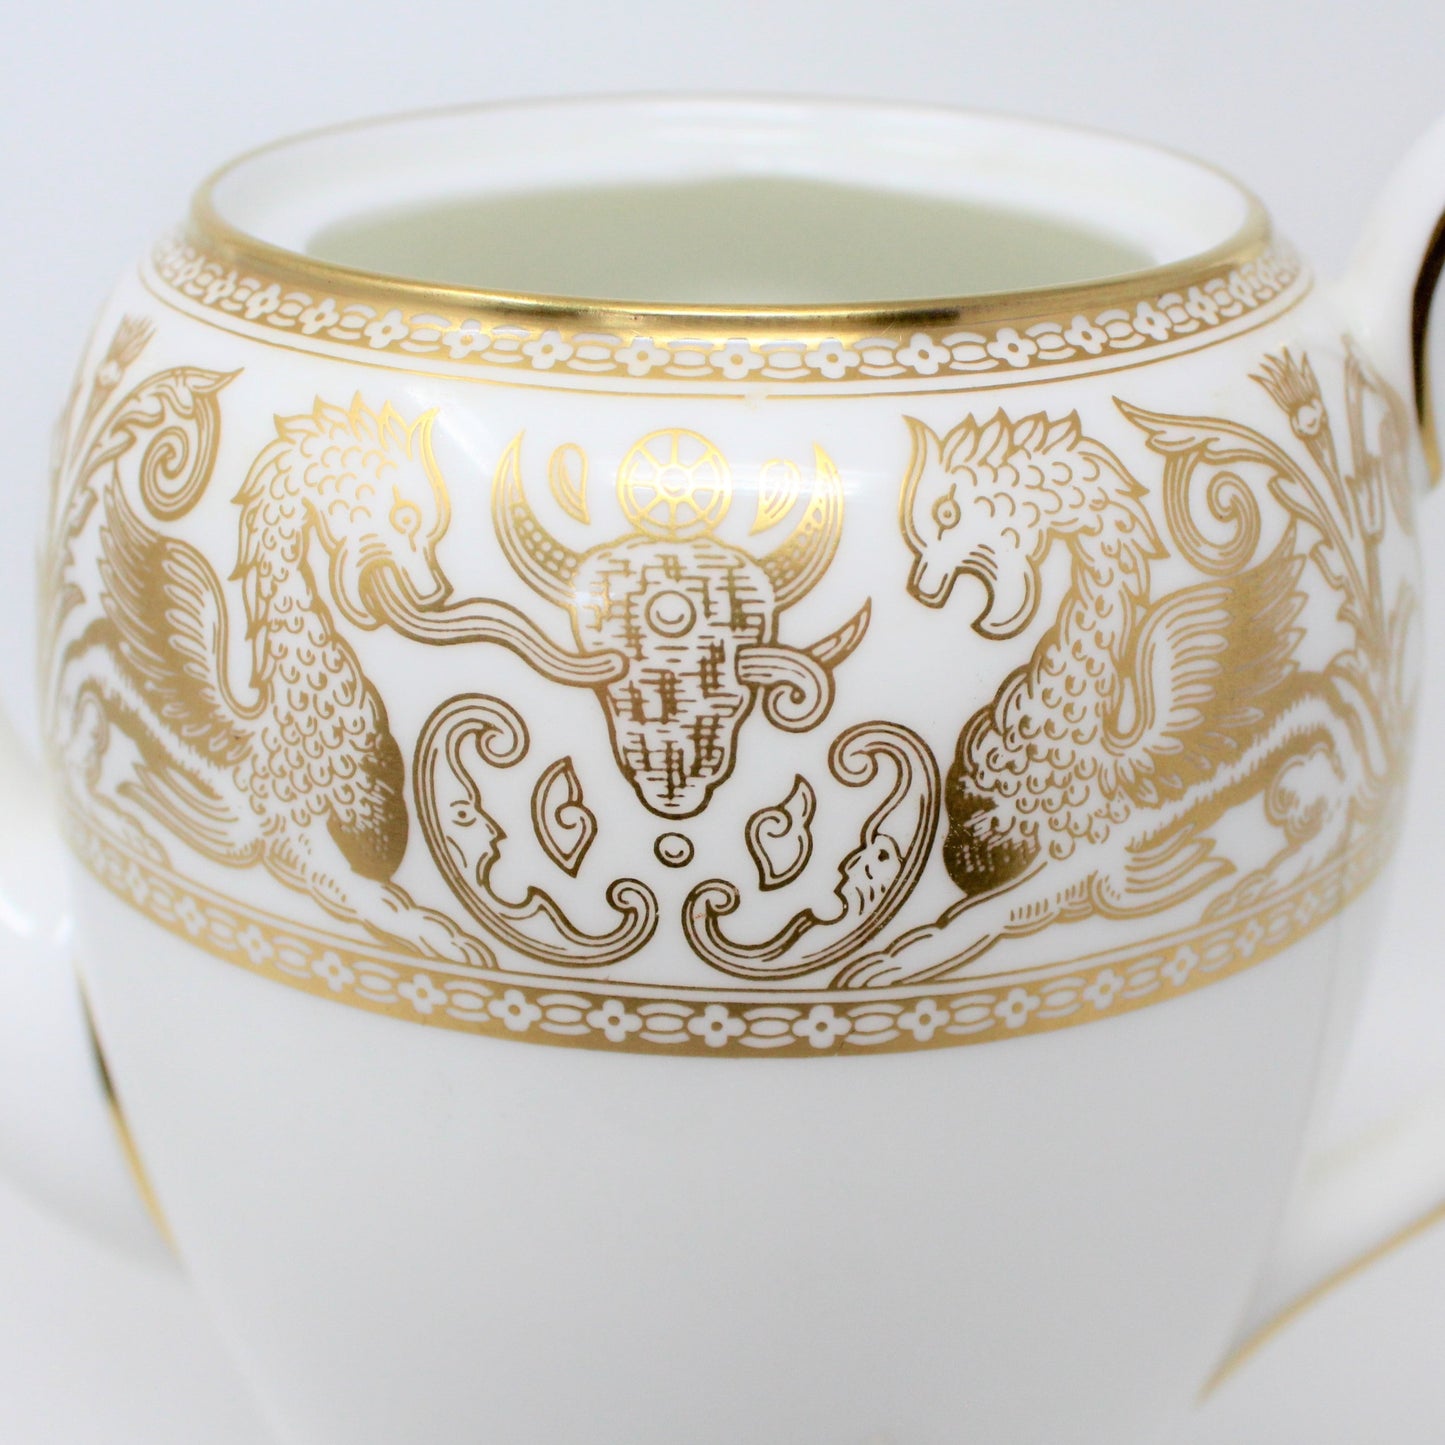 Close up of Dragons on the Florentine Gold pattern